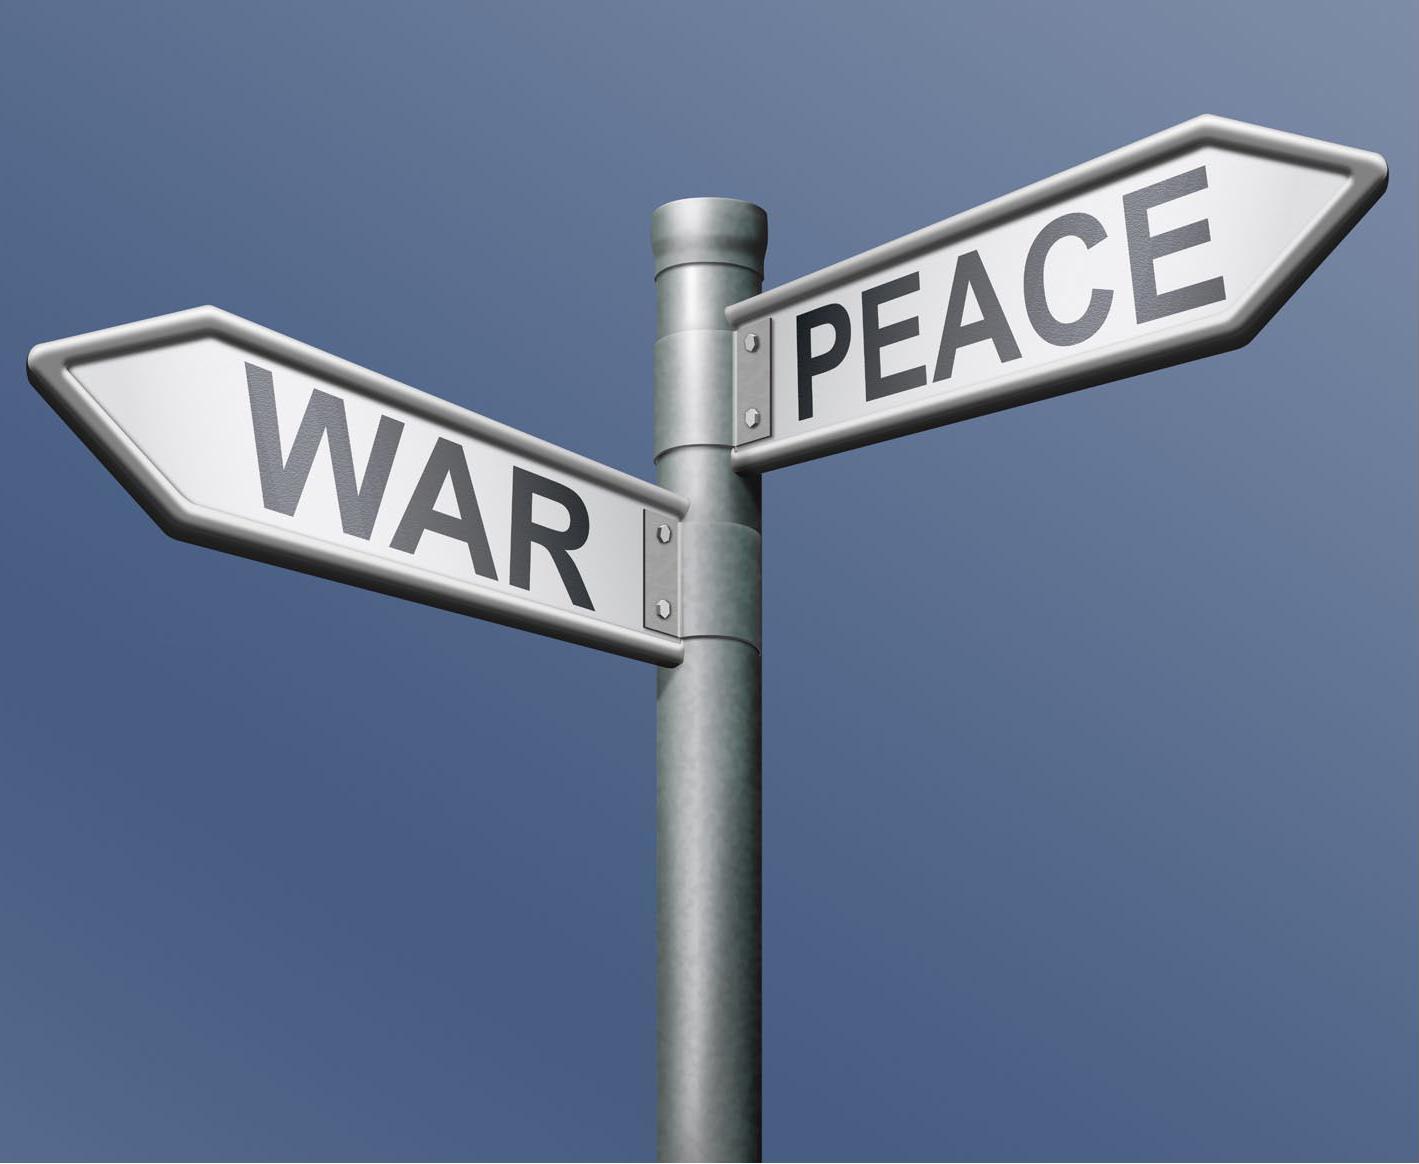 War and Peace alternate down through history. How can we establish a lasting peace which has eluded humanity so far?